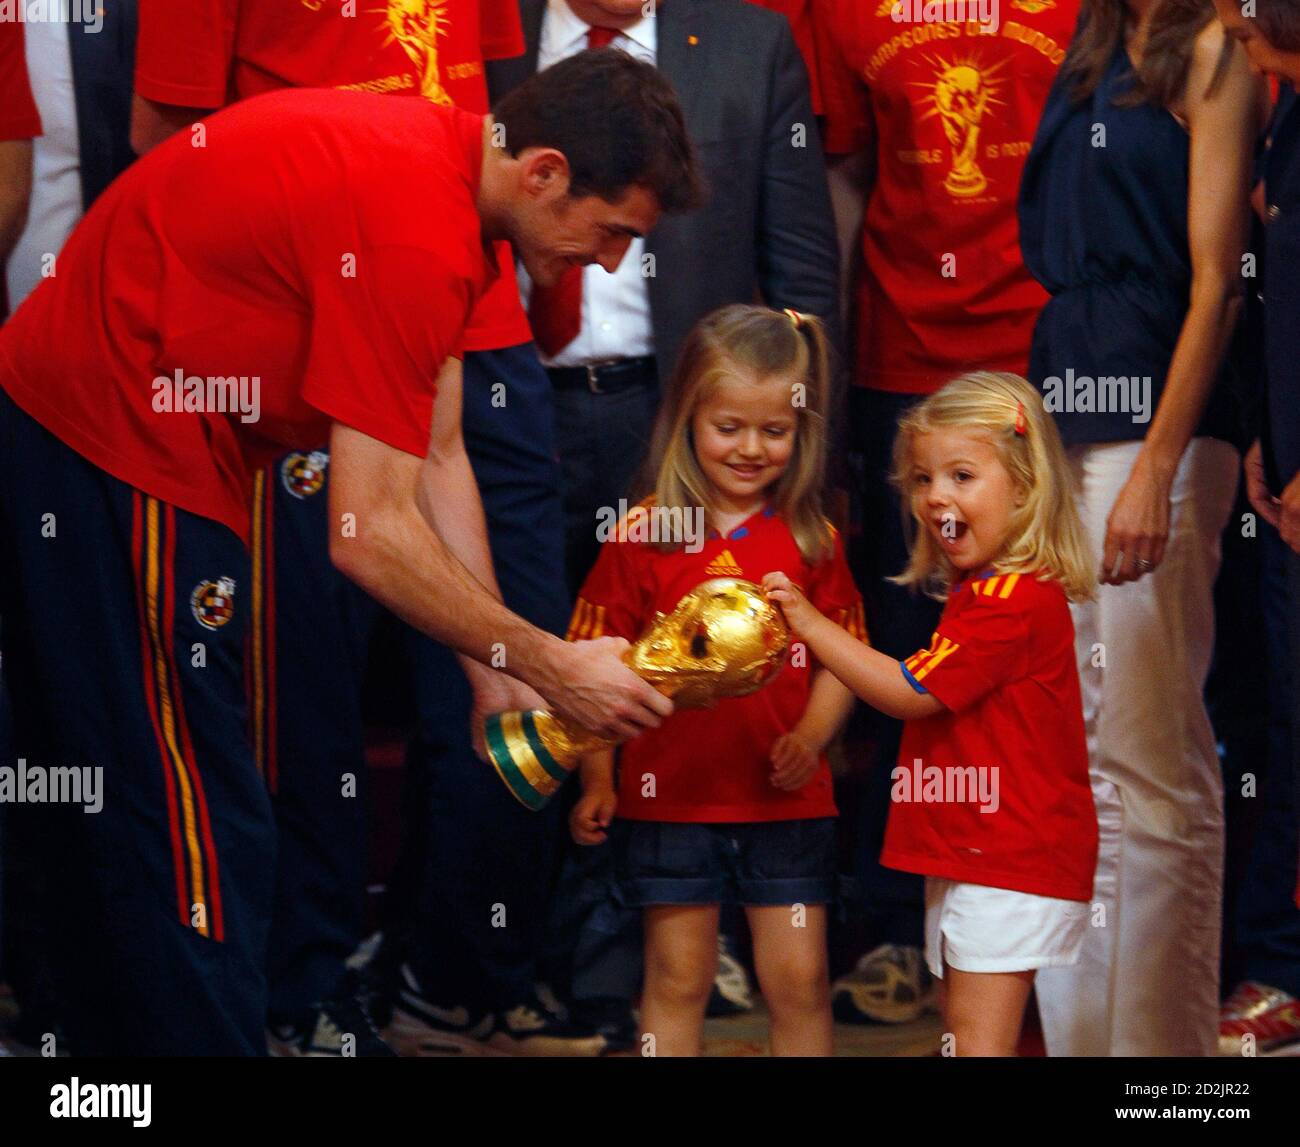 Spain's Infantas Sofia (R) and Leonor react as Spain's captain Iker  Casillas (L) shows them the World Cup trophy during a reception at Madrid's  Royal Palace July 12, 2010. Spain stunned the